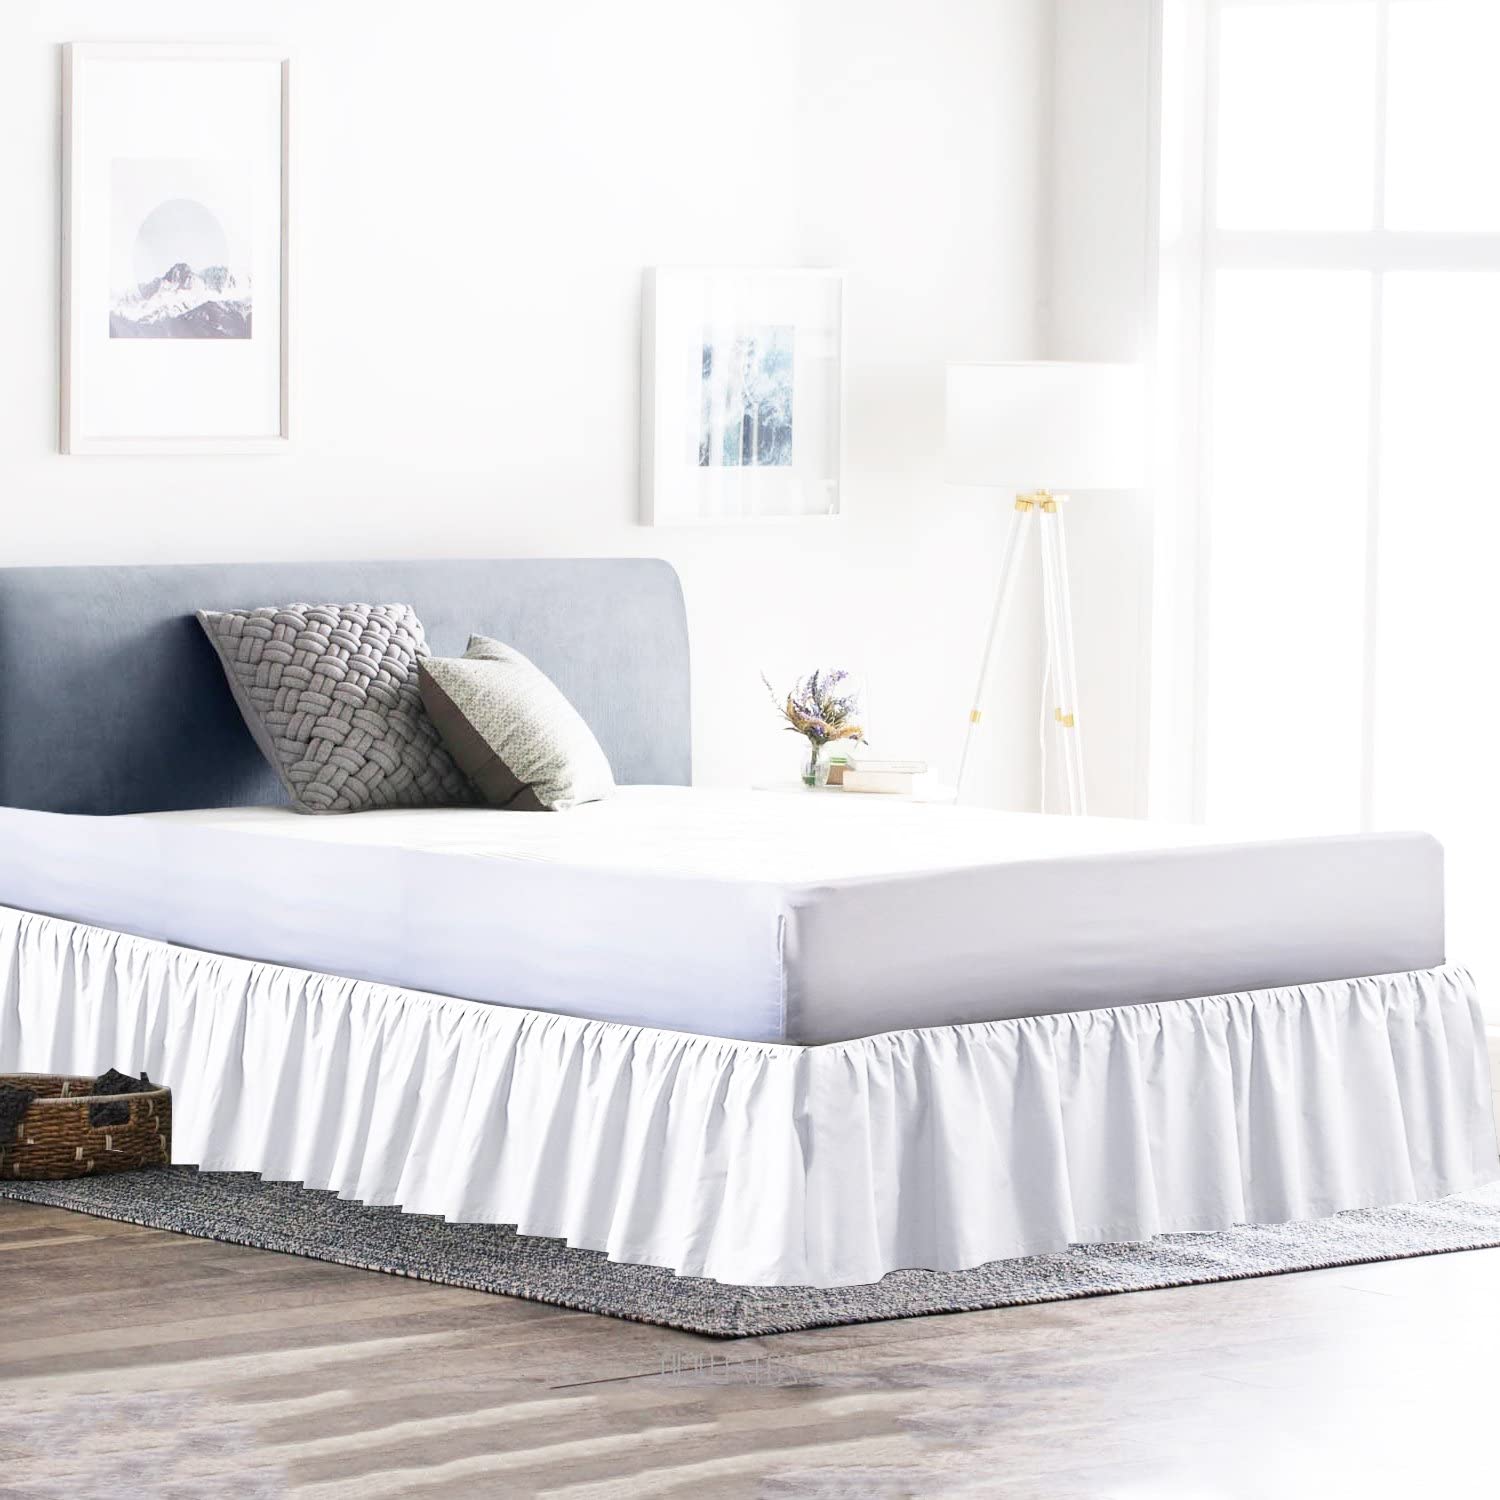 Before moving your platform bed, remove any accessories like bed skirts and bedding and store them in storage bags.